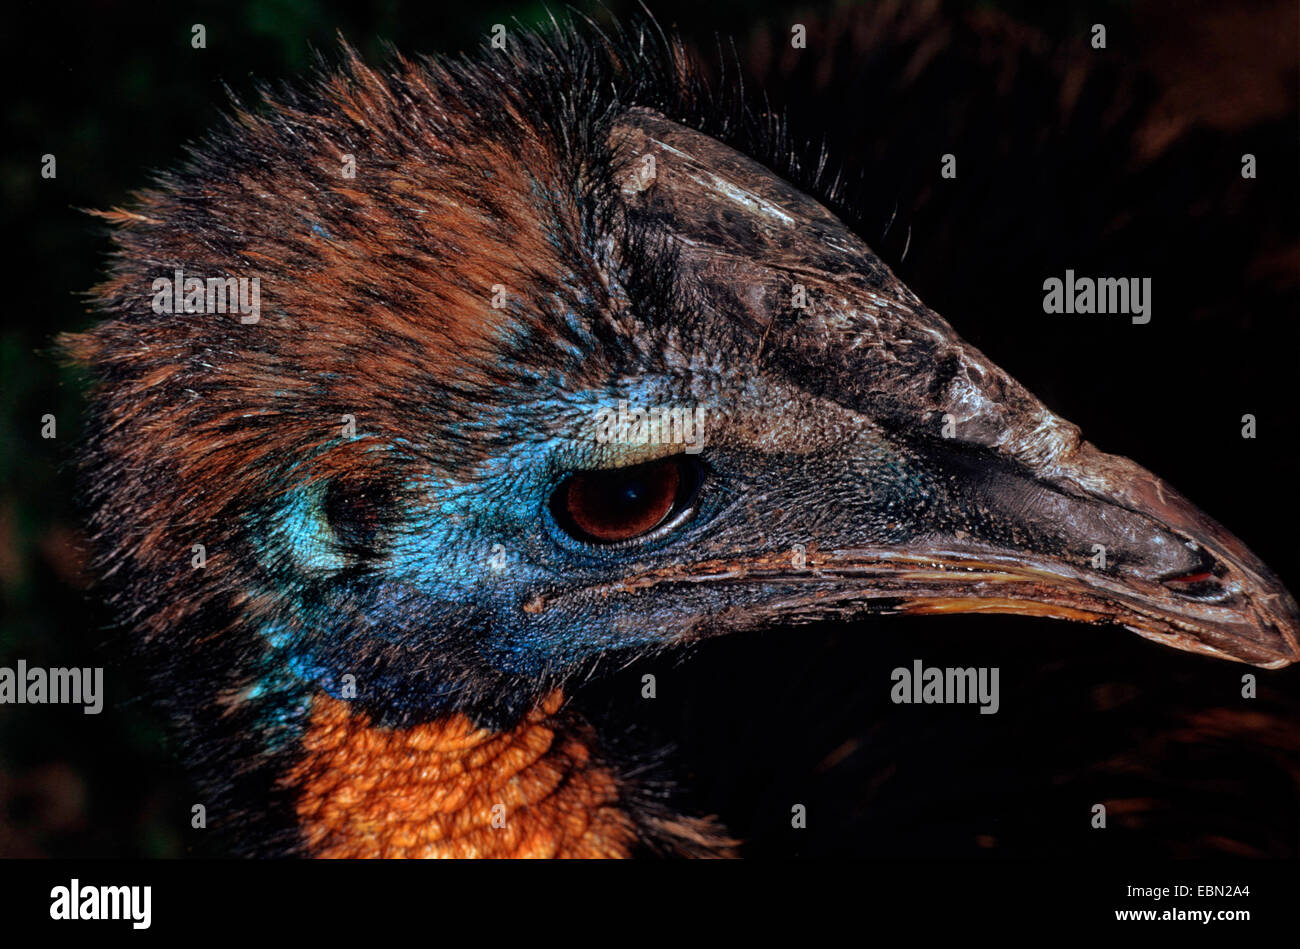 One-wattled cassowary, Northern Cassowary, Single-wattled Cassowary, Golden-necked Cassowary (Casuarius unappendiculatus), portraet of a young bird Stock Photo